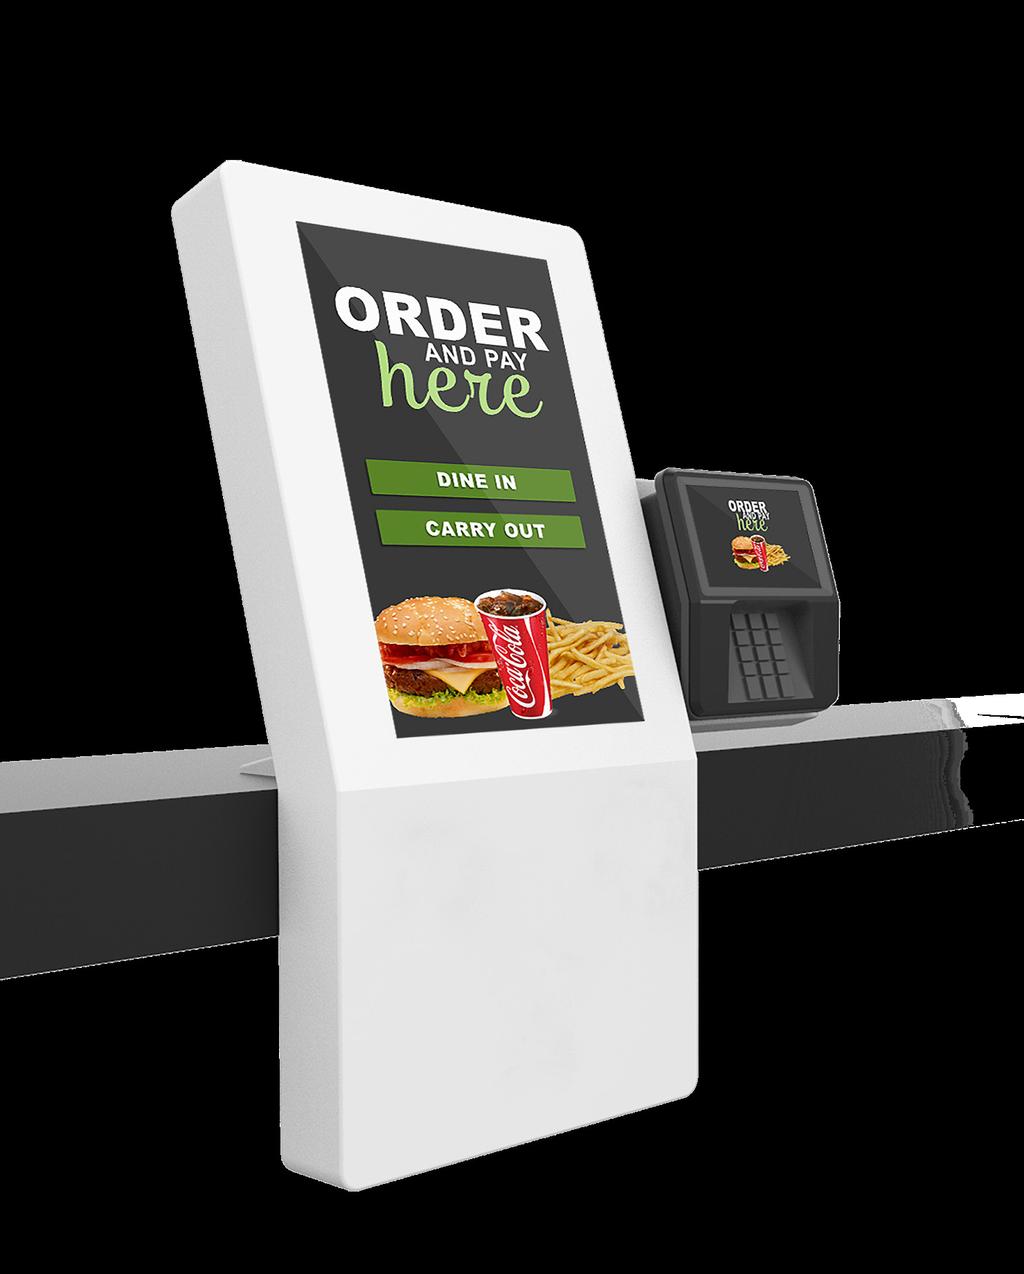 Countertop Kiosk Provide big service in a small space, and